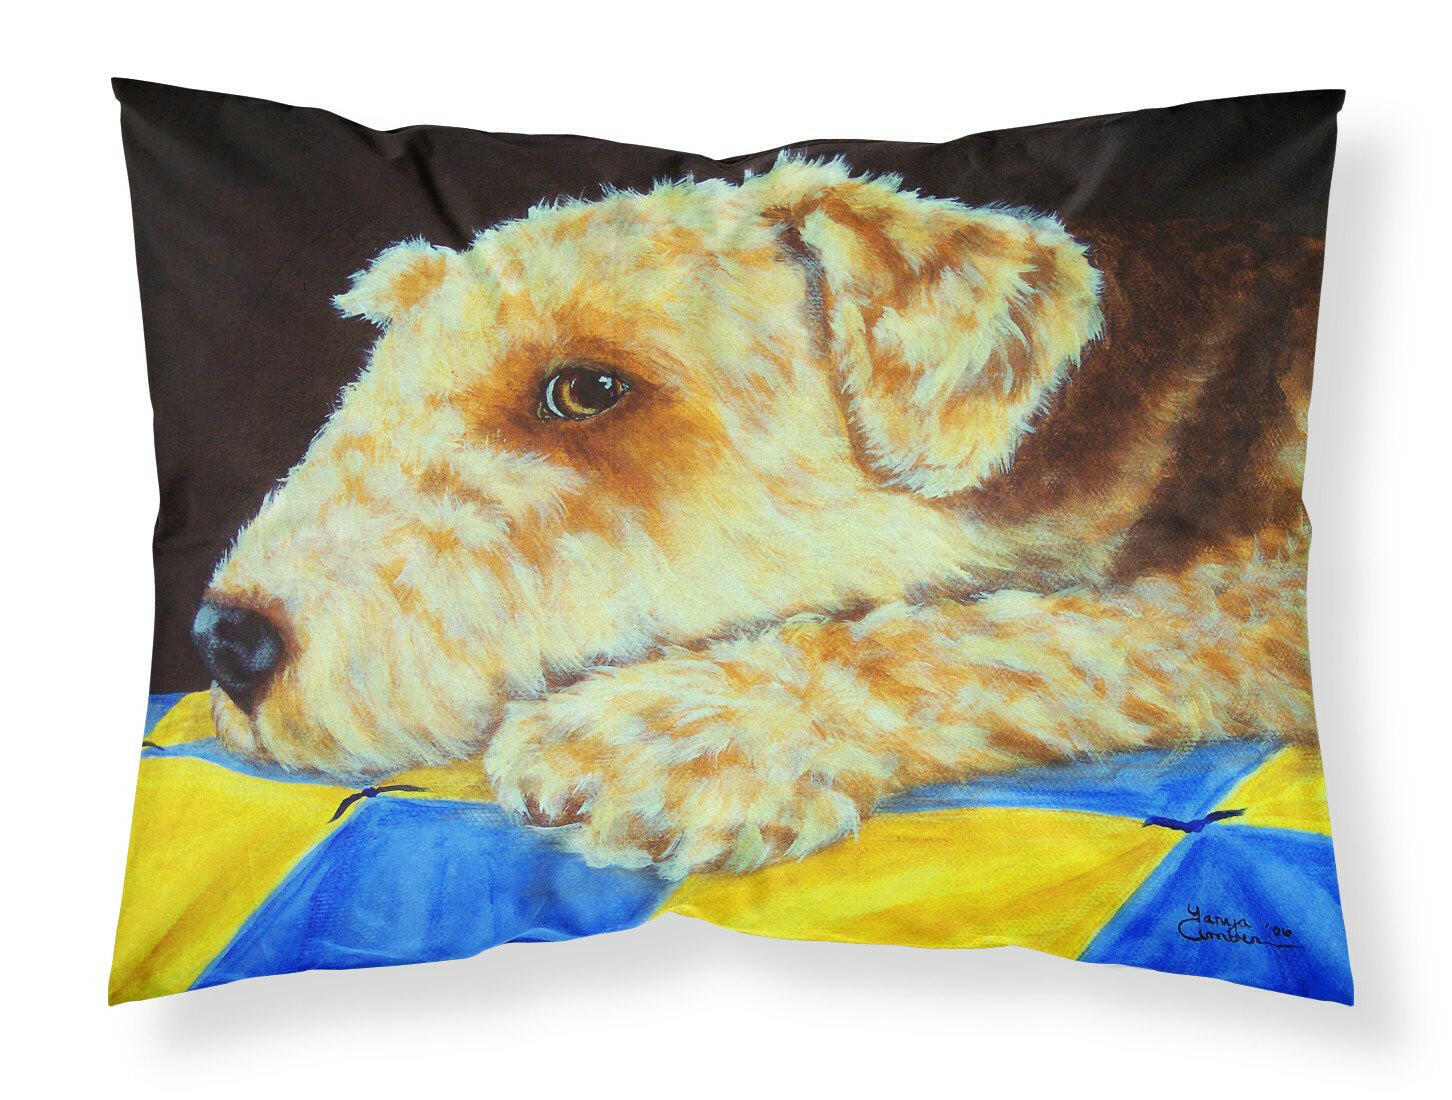 Airedale Terrier Momma's Quilt Fabric Standard Pillowcase AMB1174PILLOWCASE by Caroline's Treasures